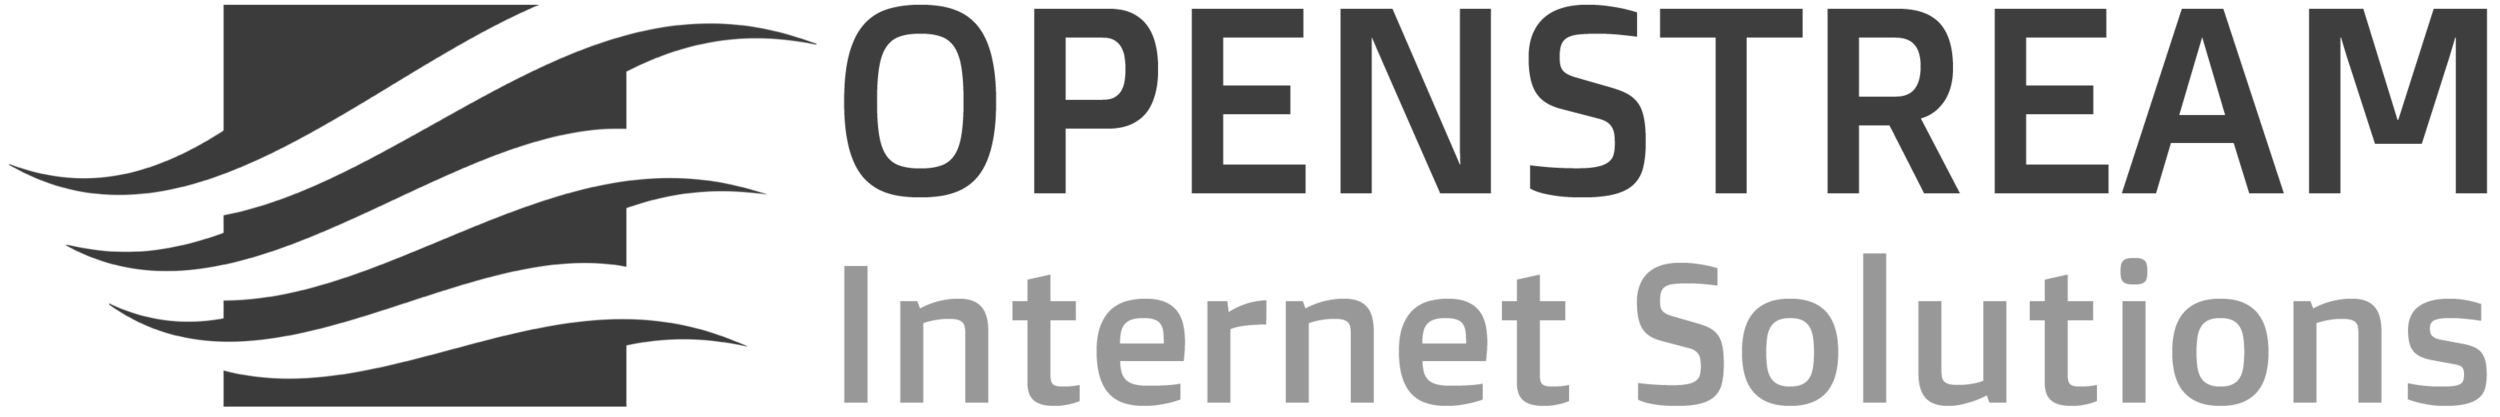 openstream-internet-solutions.png